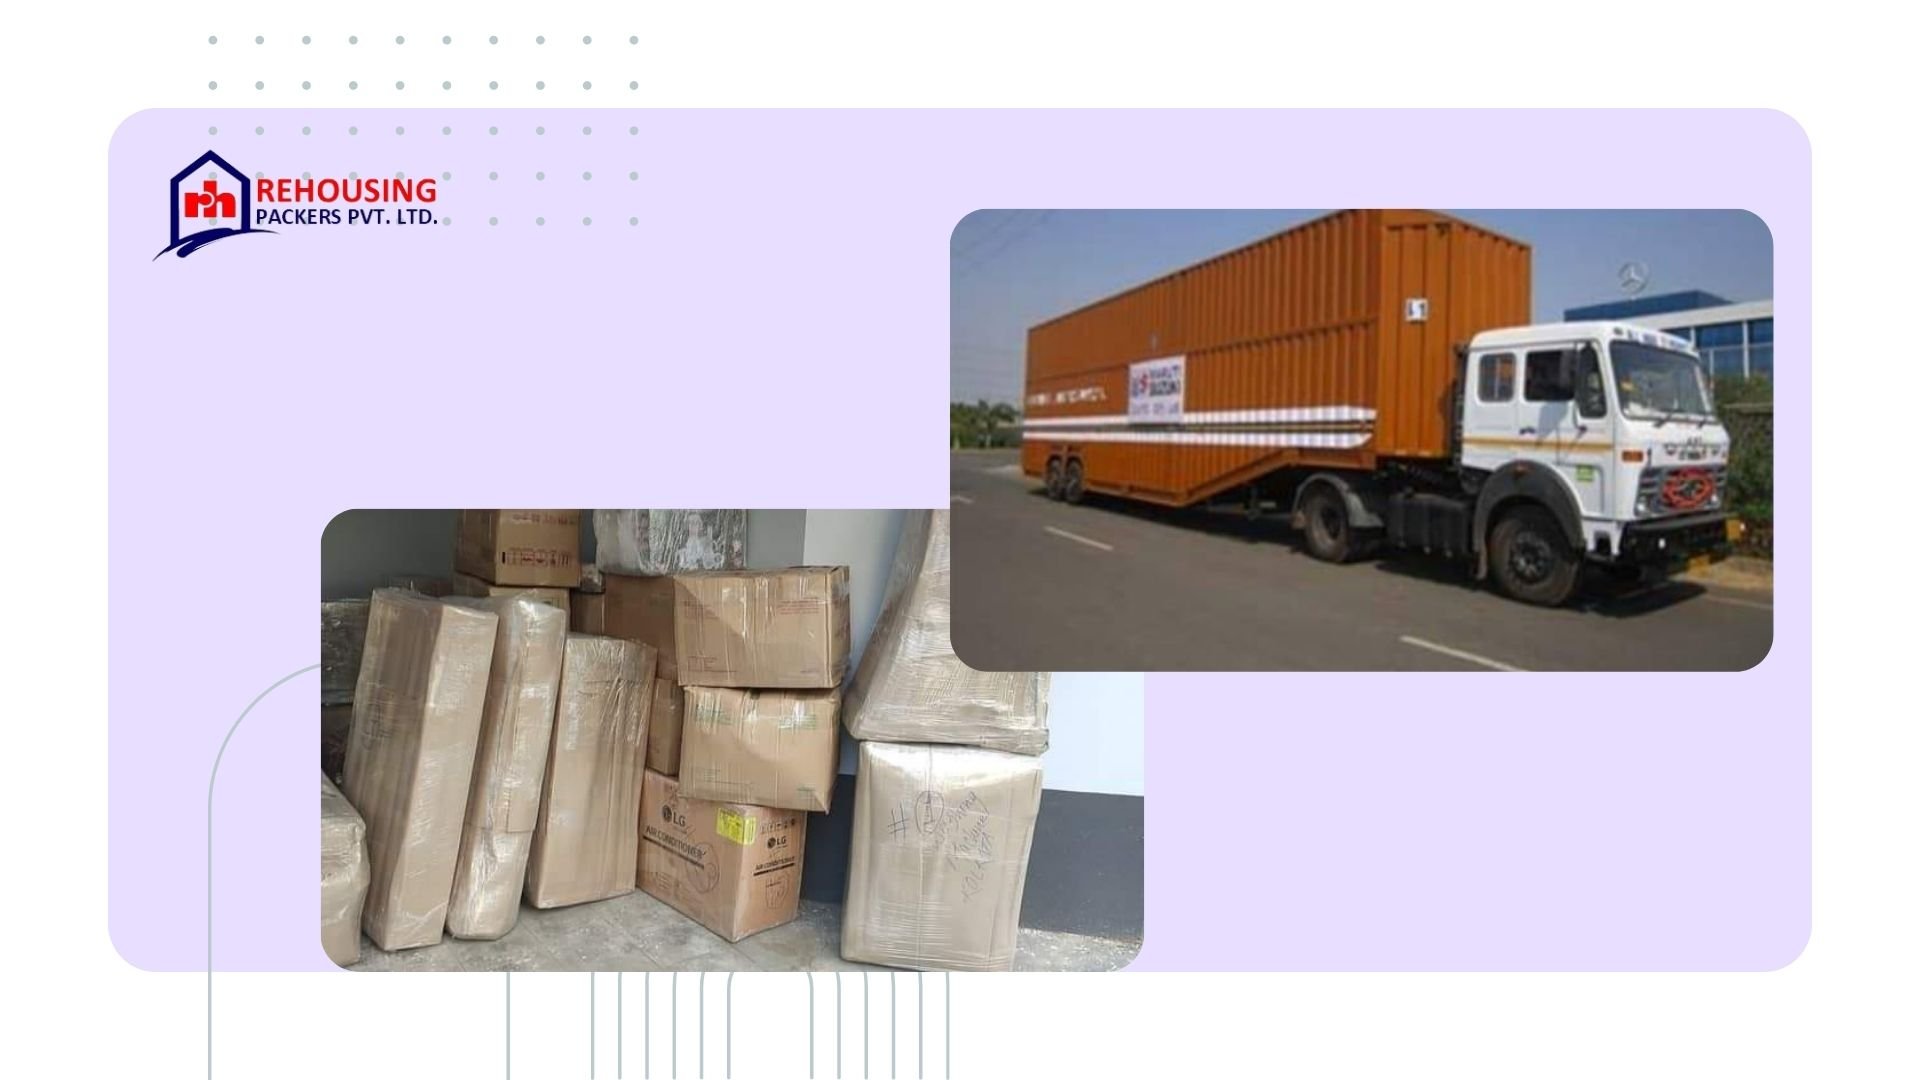 Rehousing International Packers and Movers in Gurgaon |Top shipping companies serving globally